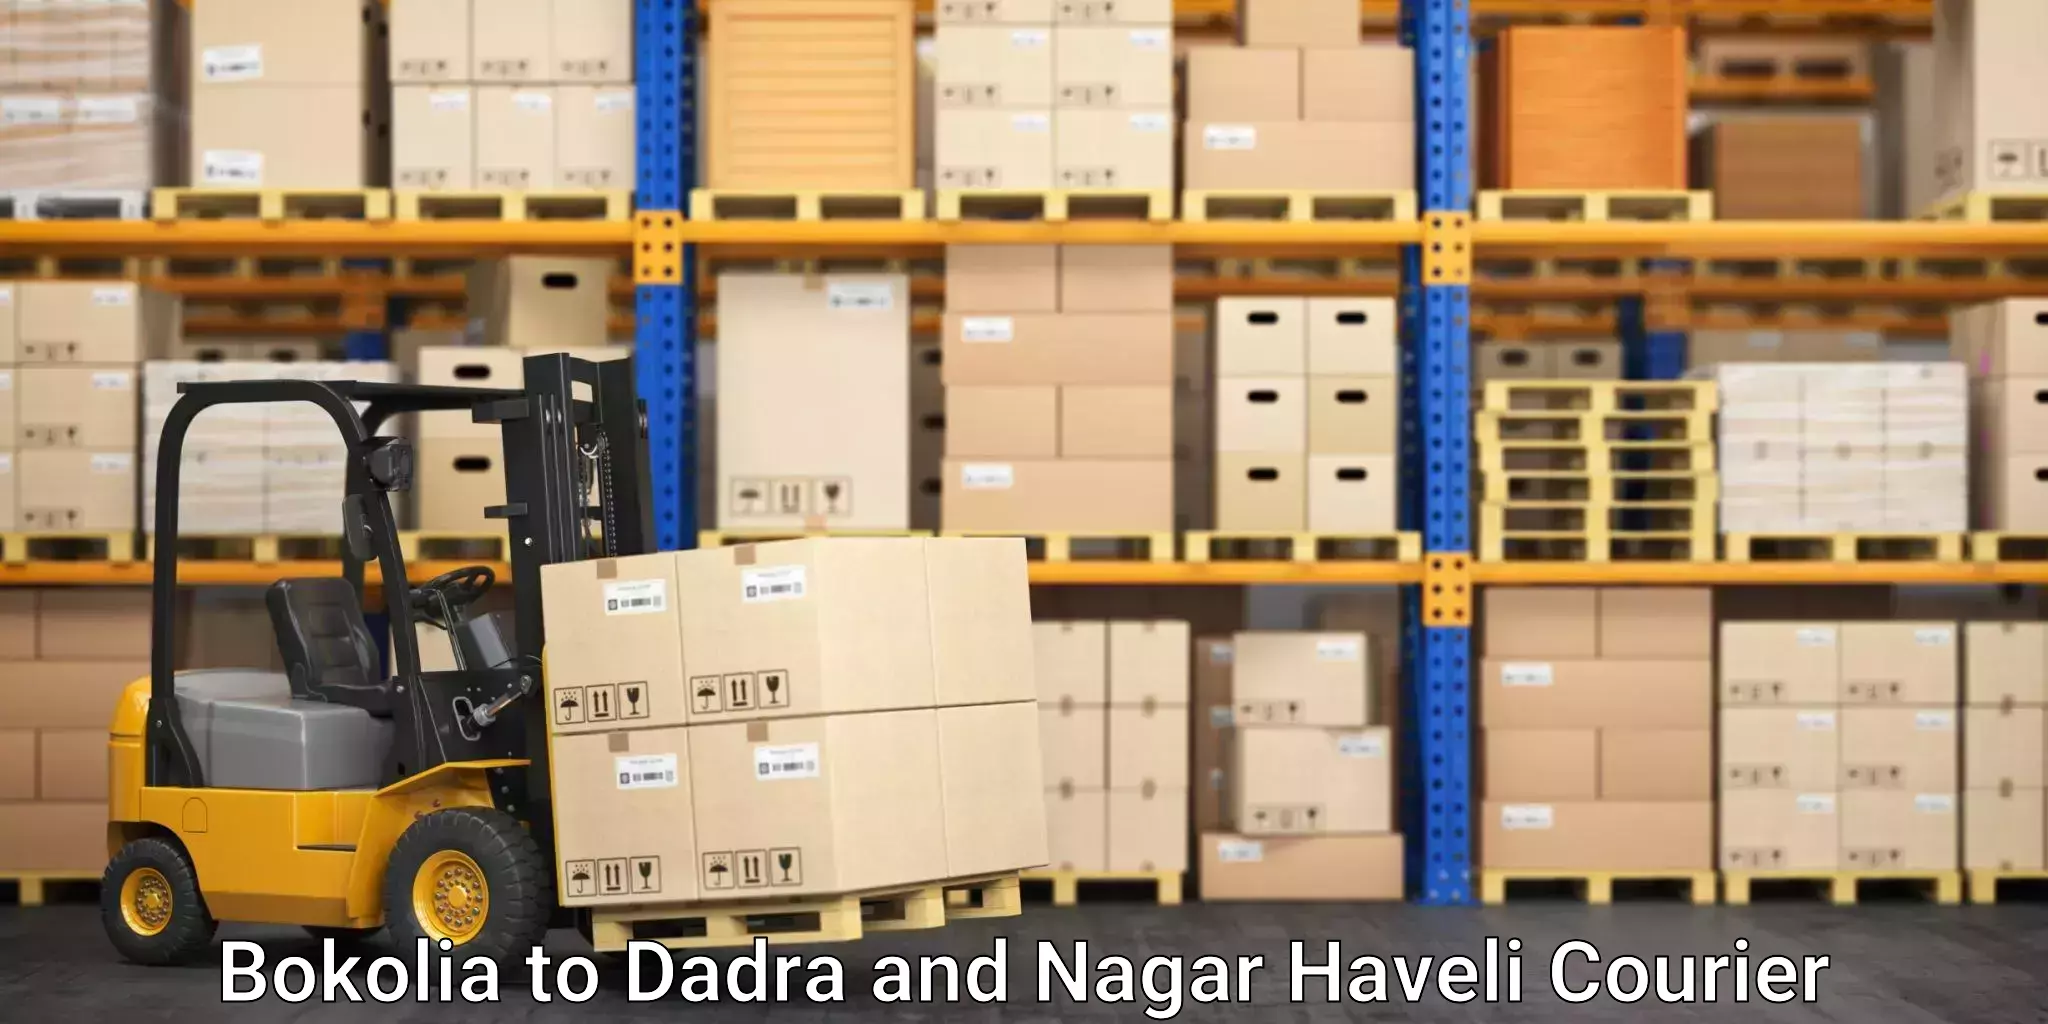 Comprehensive shipping services in Bokolia to Dadra and Nagar Haveli